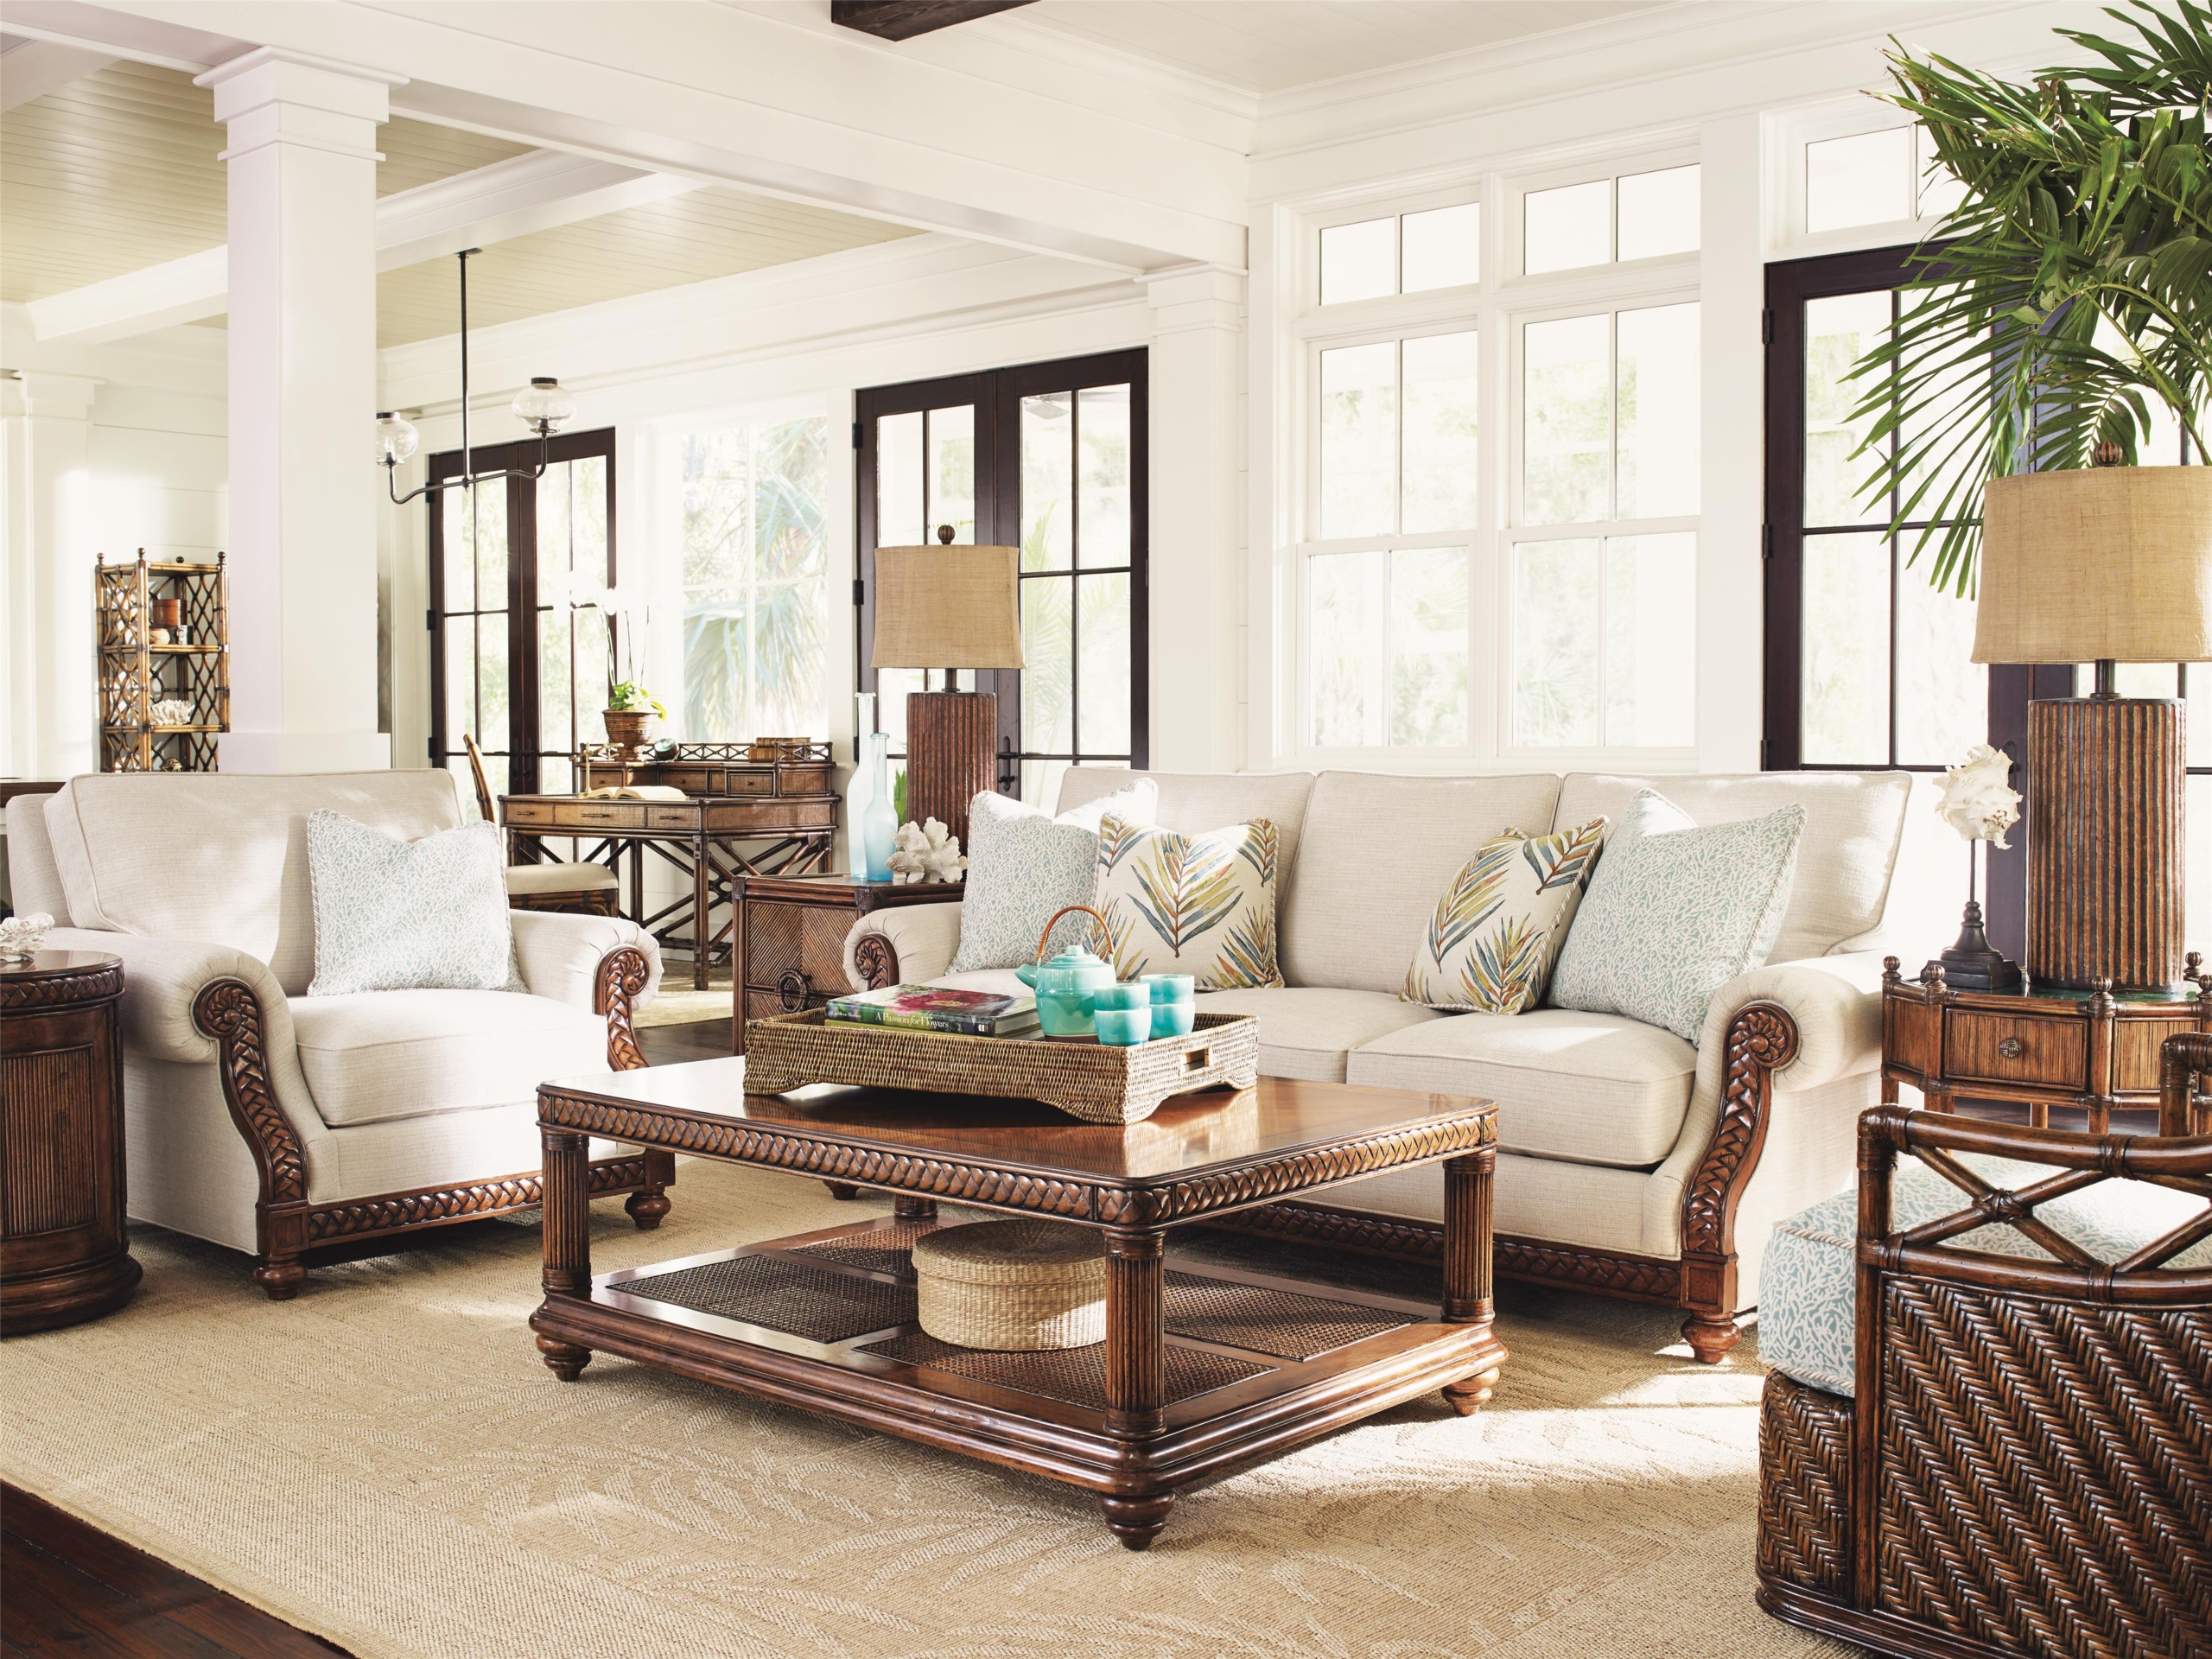 50 Tommy Bahama Decorating Ideas You Ll Love In 2020